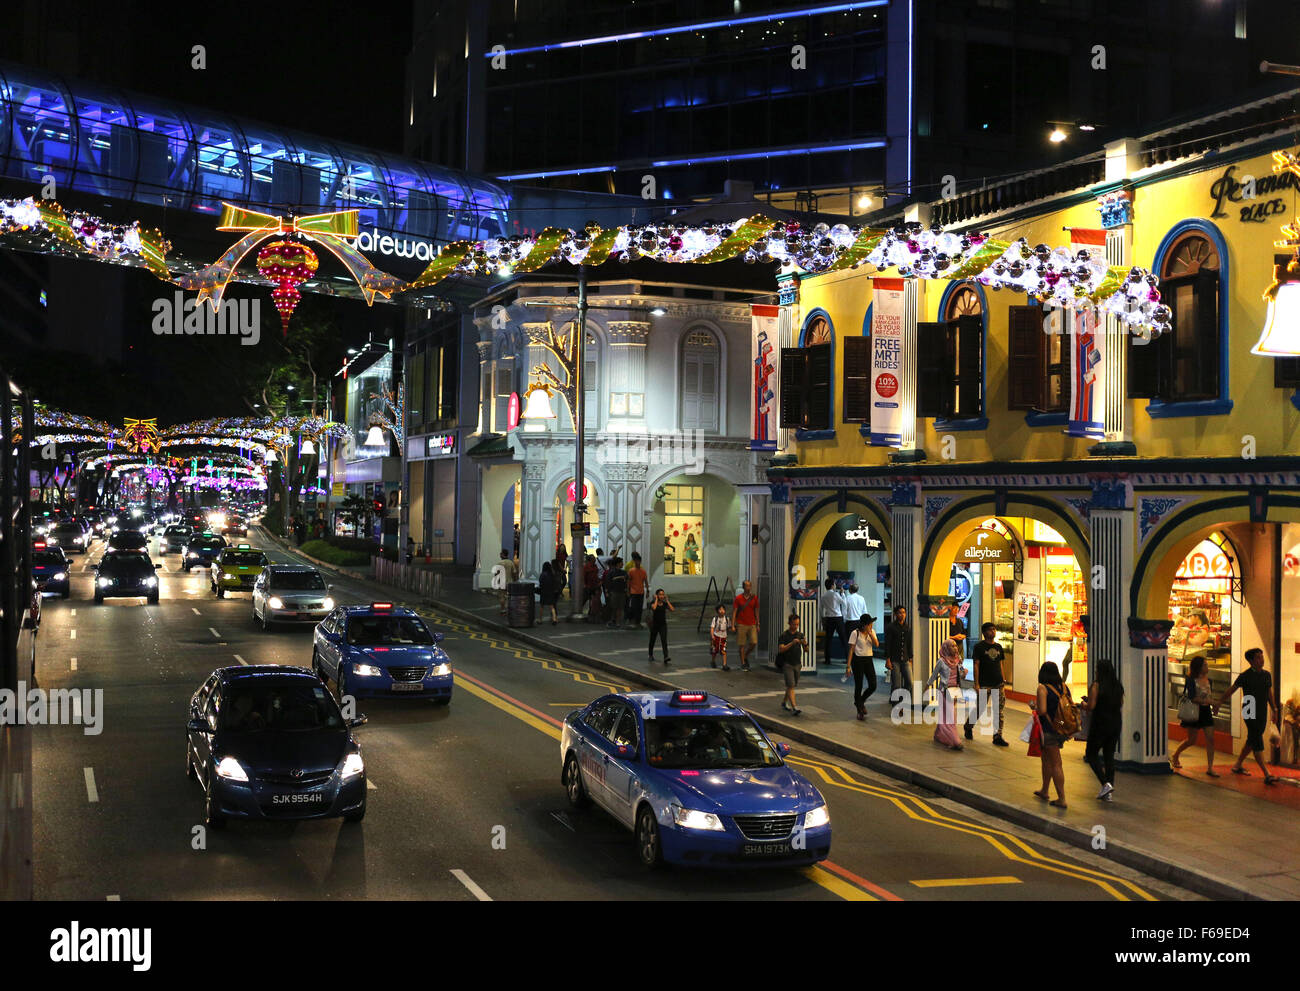 Singapore, Christmas light-up will be displayed from Nov. 14. 3rd Jan, 2016. Photo taken on Nov. 14, 2015 shows Christmas lights at Orchard Road in Singapore. Themed on 'Christmas on A Great Street', this year's Christmas light-up will be displayed from Nov. 14, 2015 to Jan. 3, 2016. Visitors can look forward to celebrating the festive season in an atmosphere of merriment. Credit:  Bao Xuelin/Xinhua/Alamy Live News Stock Photo